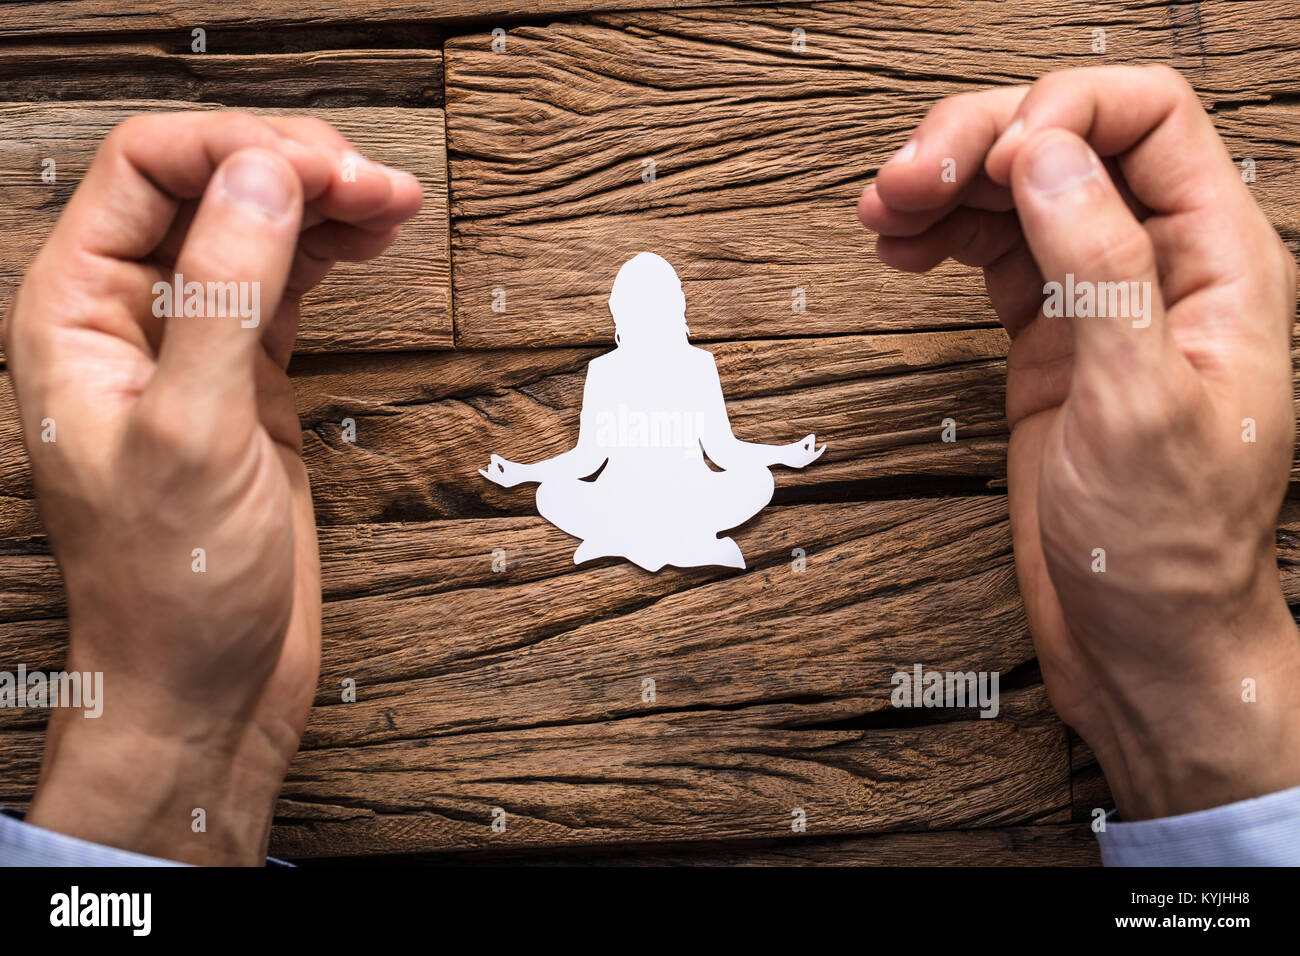 The Man's Fingers In Mudra Gesture With Lotus Pose Made Up Of White Cut-out Paper Stock Photo